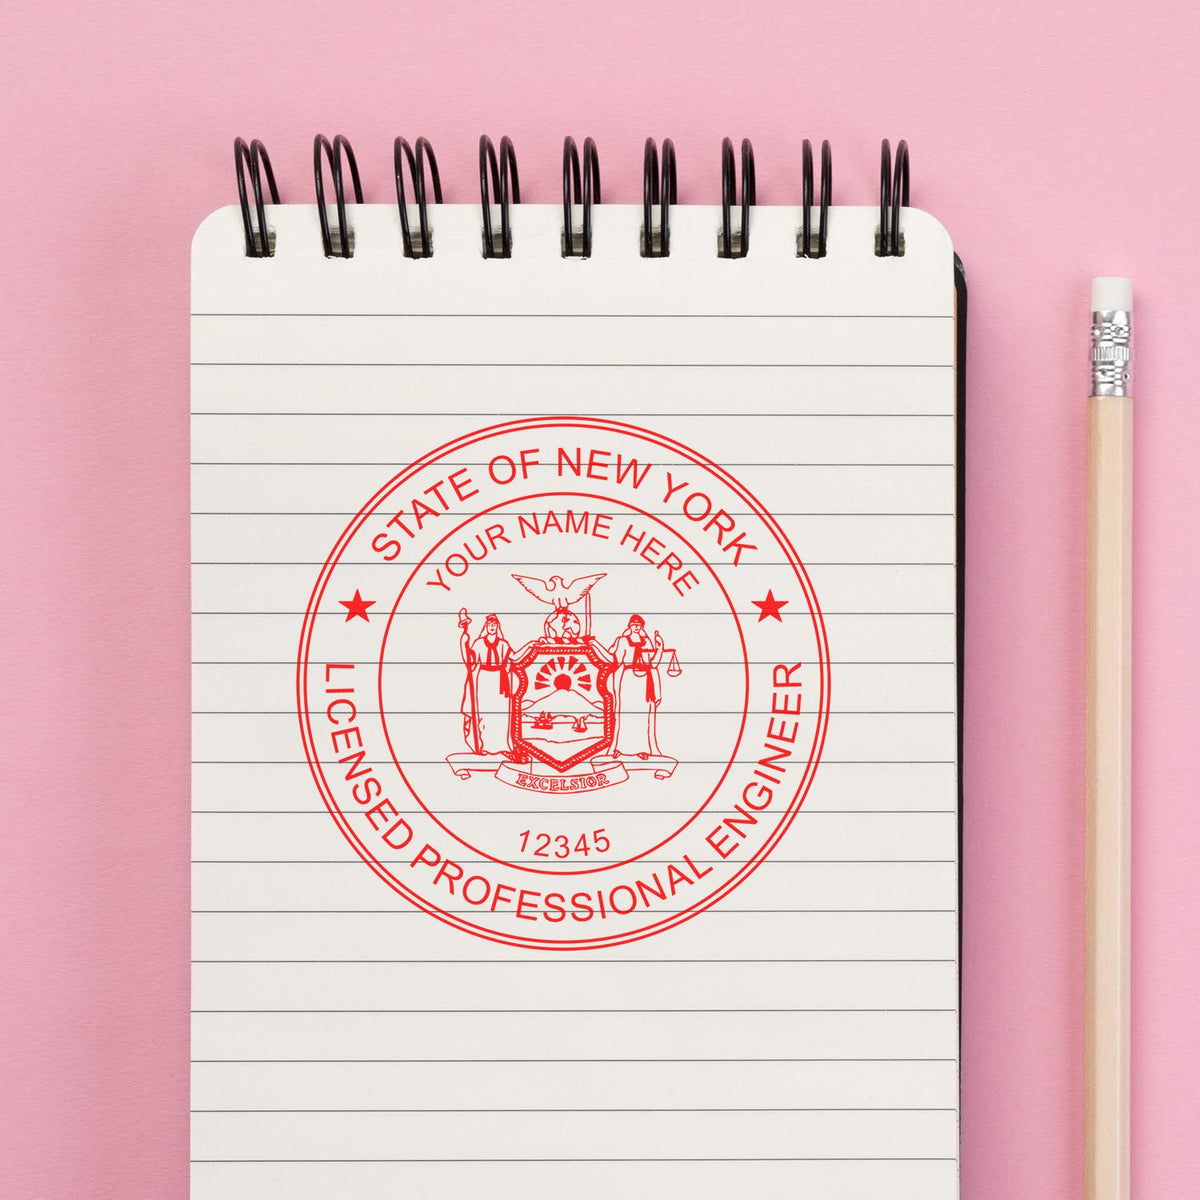 A photograph of the Digital New York PE Stamp and Electronic Seal for New York Engineer stamp impression reveals a vivid, professional image of the on paper.